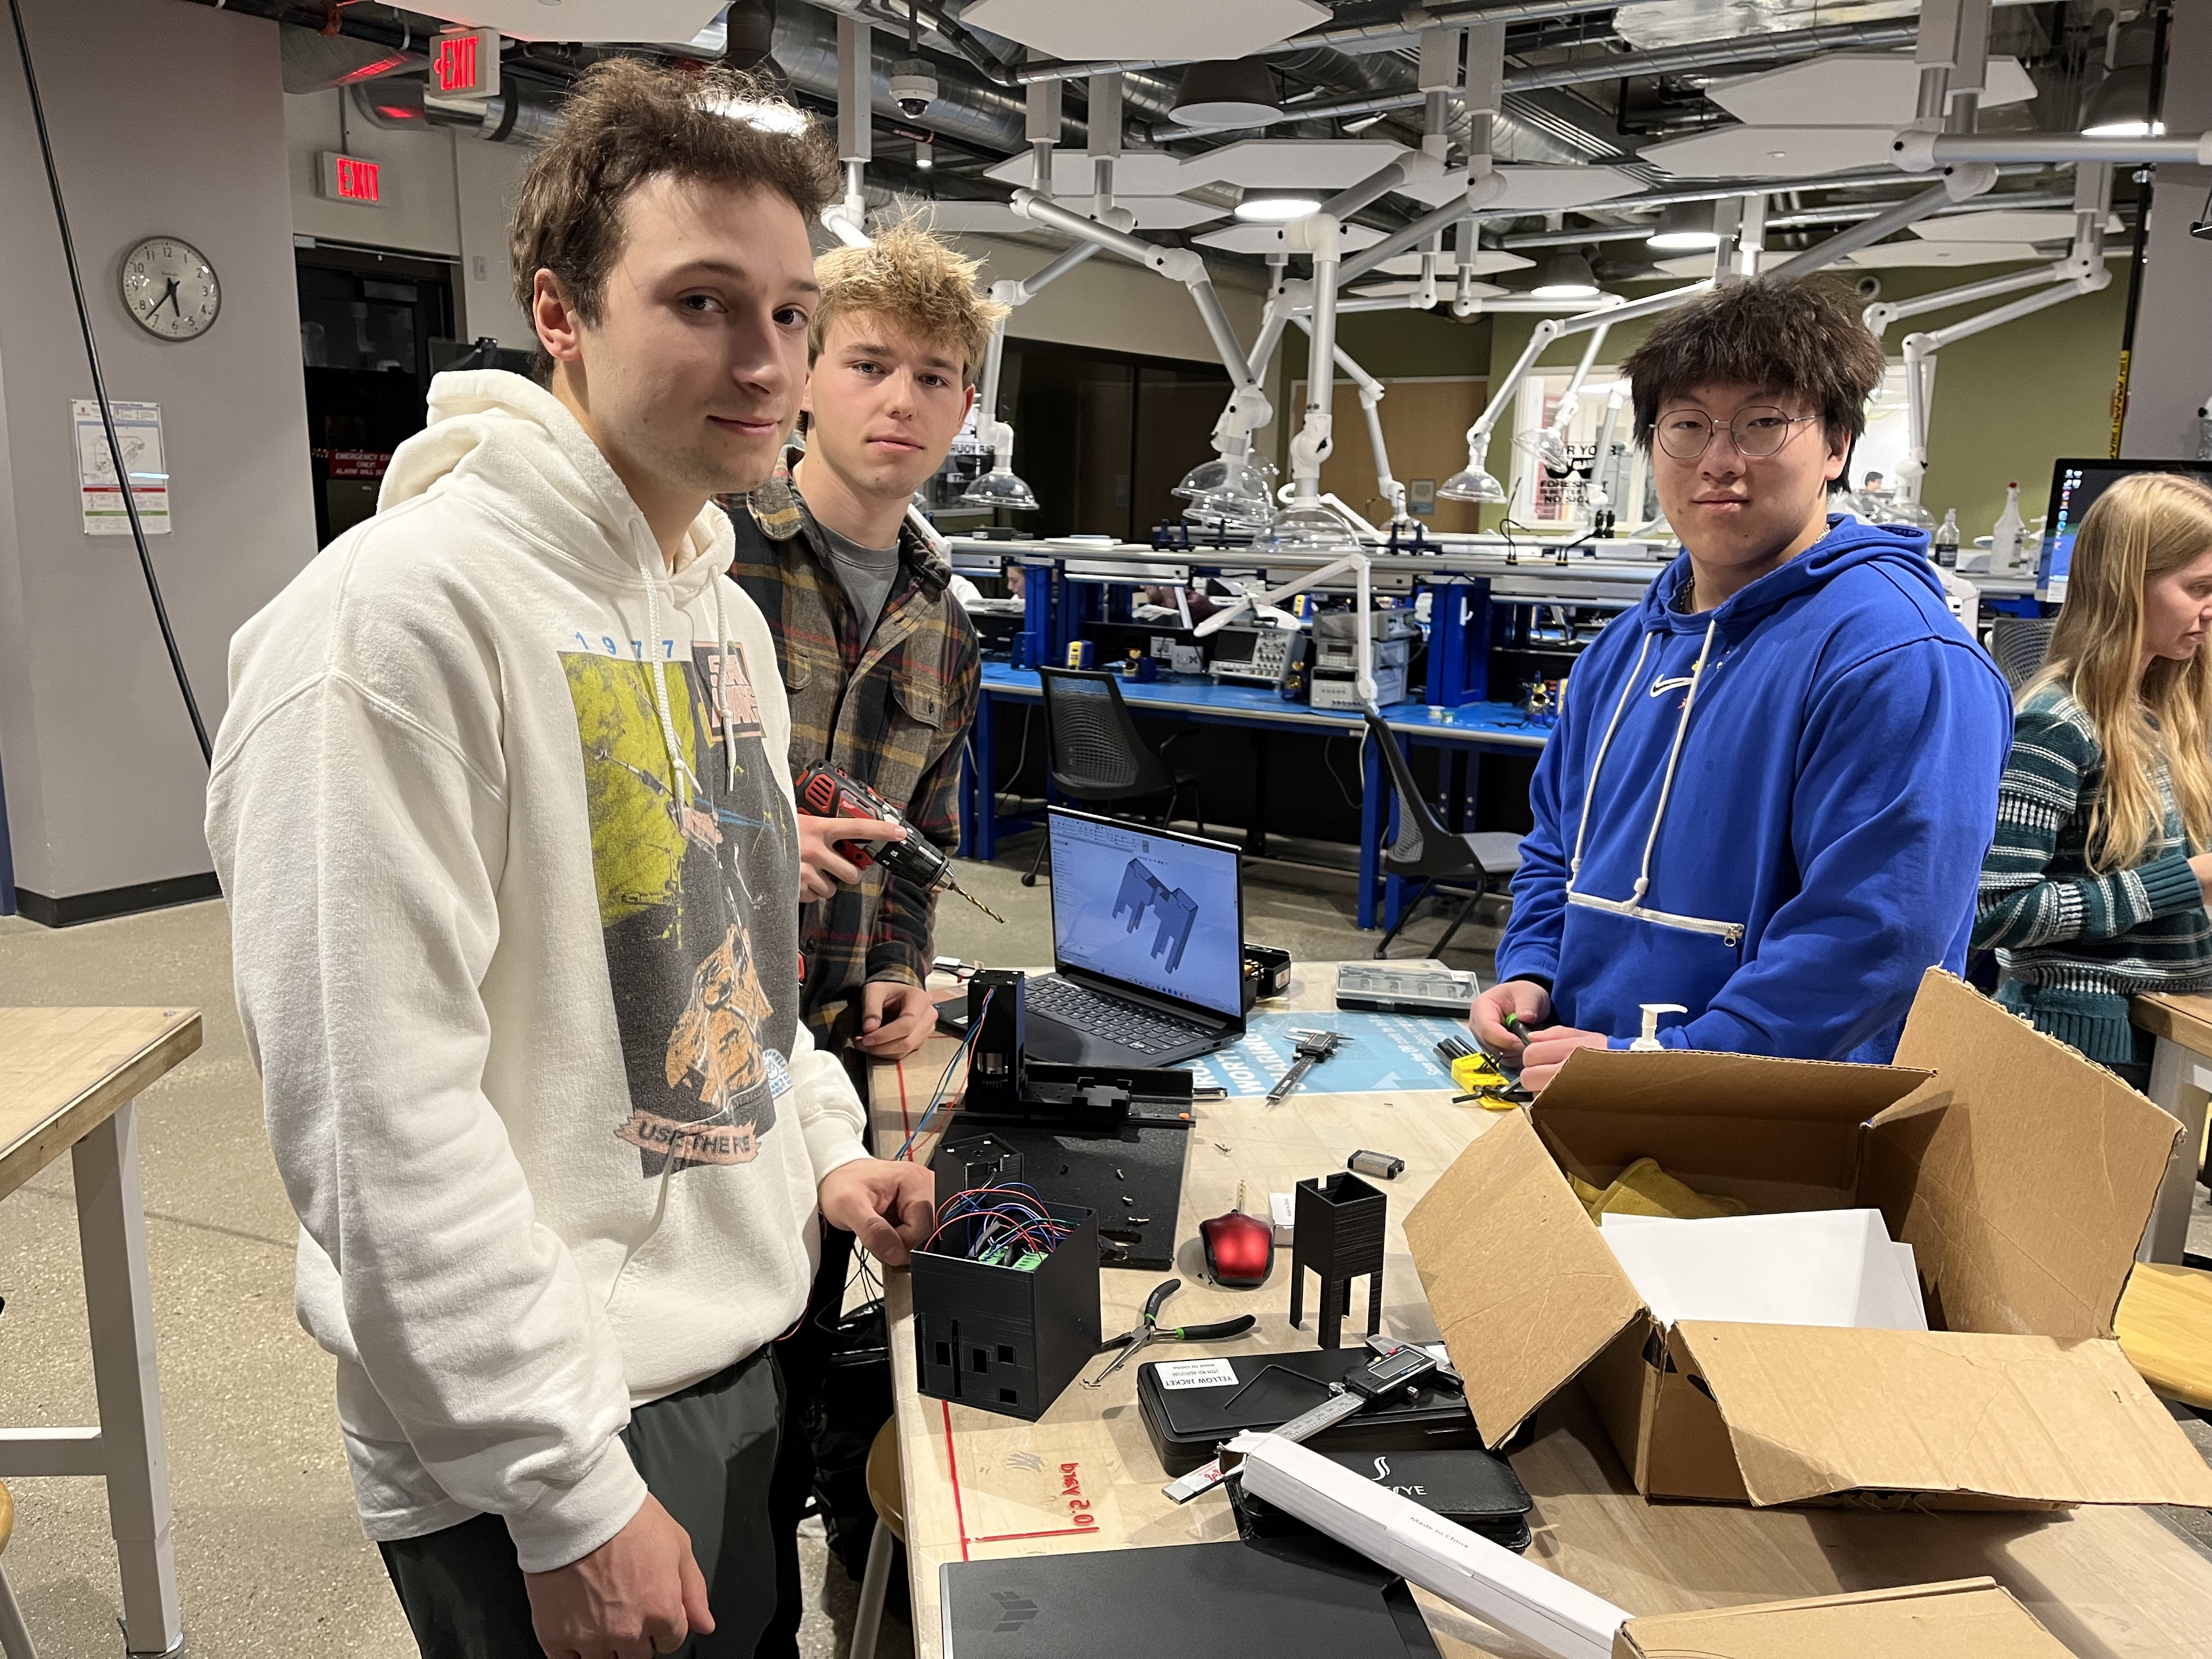 Team members Sawyer Bussey (left), Tyler Haupert (center) and Jerry Tang(Right). Fabrication and assembly in the makerspace